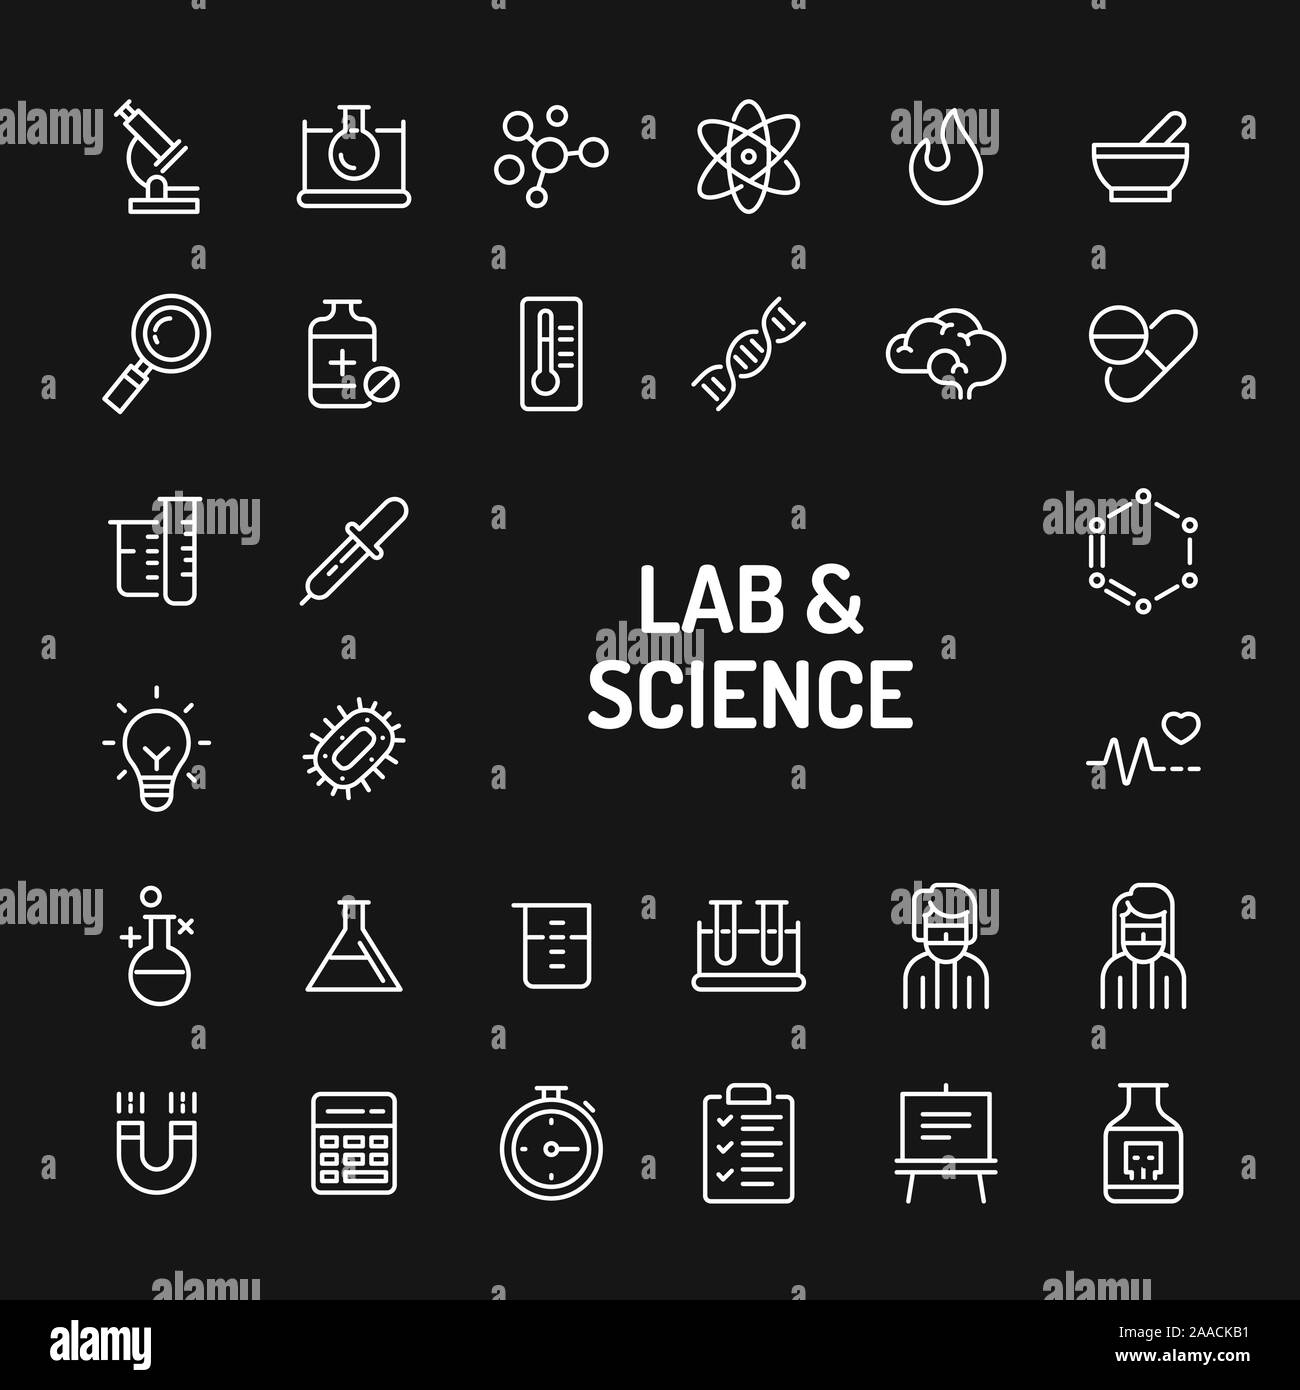 Simple white line icons isolated over black background related to science research, Laboratory experiments and equipments. Vector signs and symbols co Stock Vector